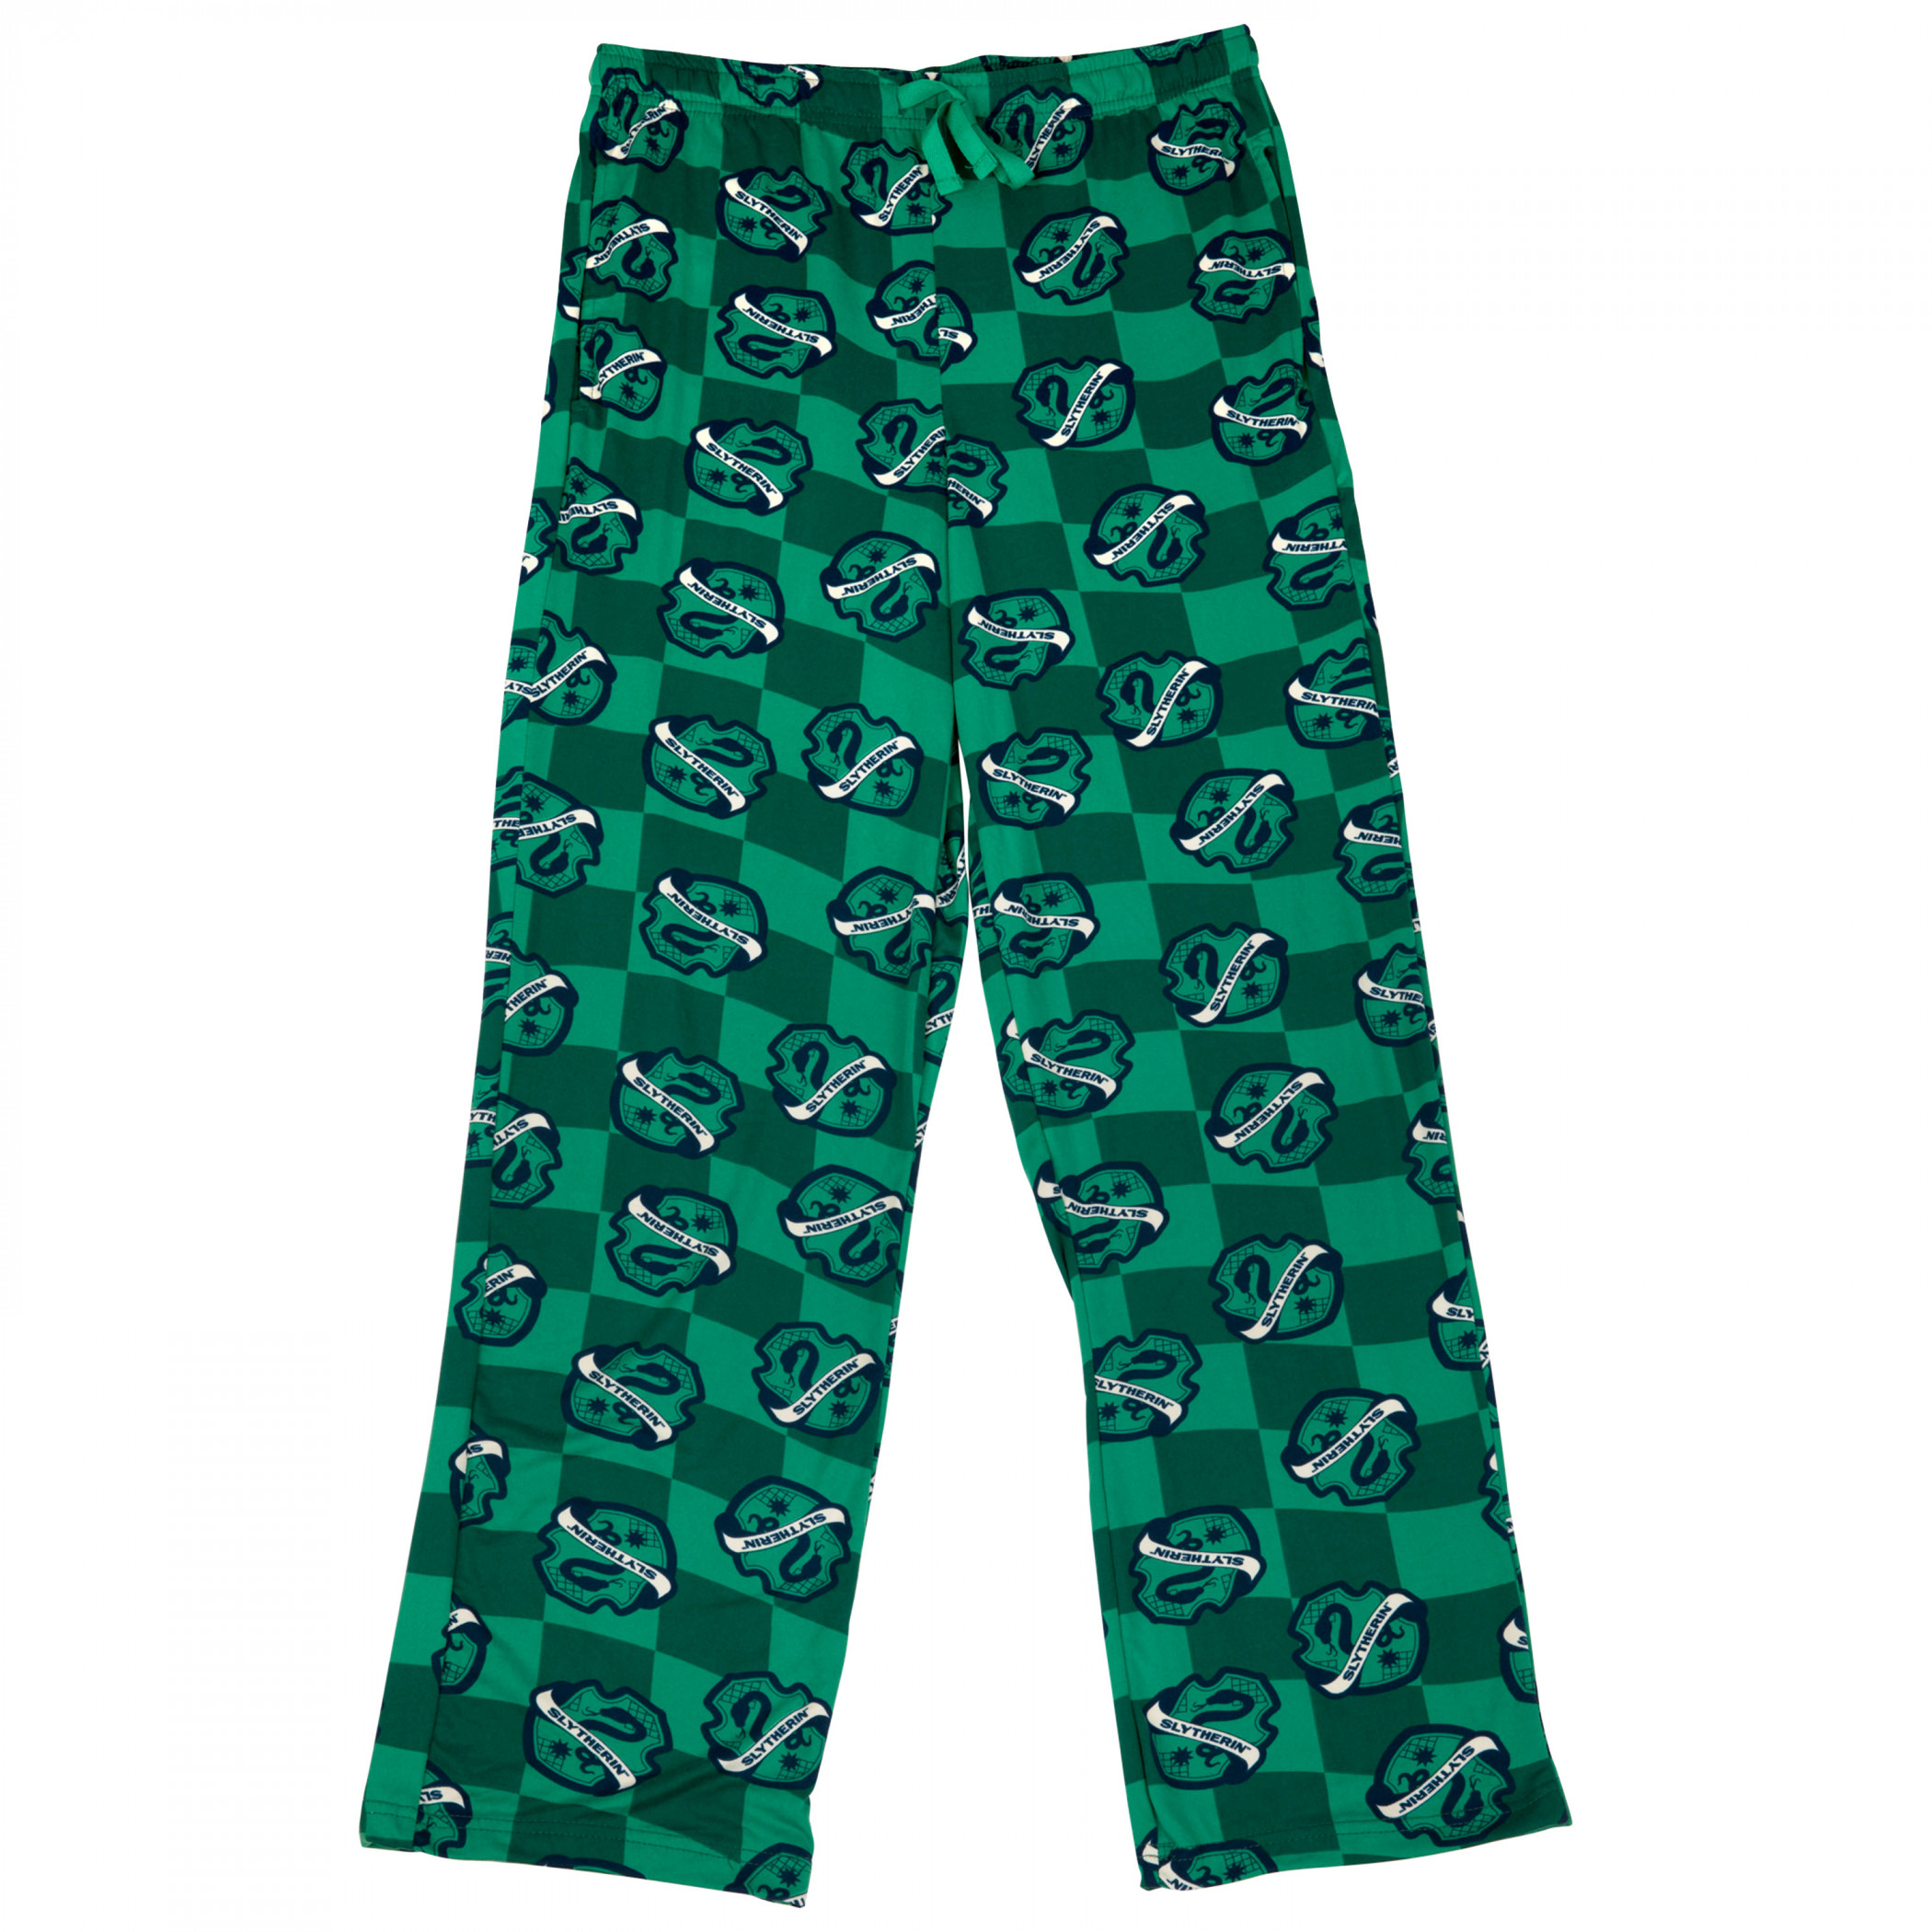 Harry Potter Slytherin House Crest All Over Print Sleep Pants Green